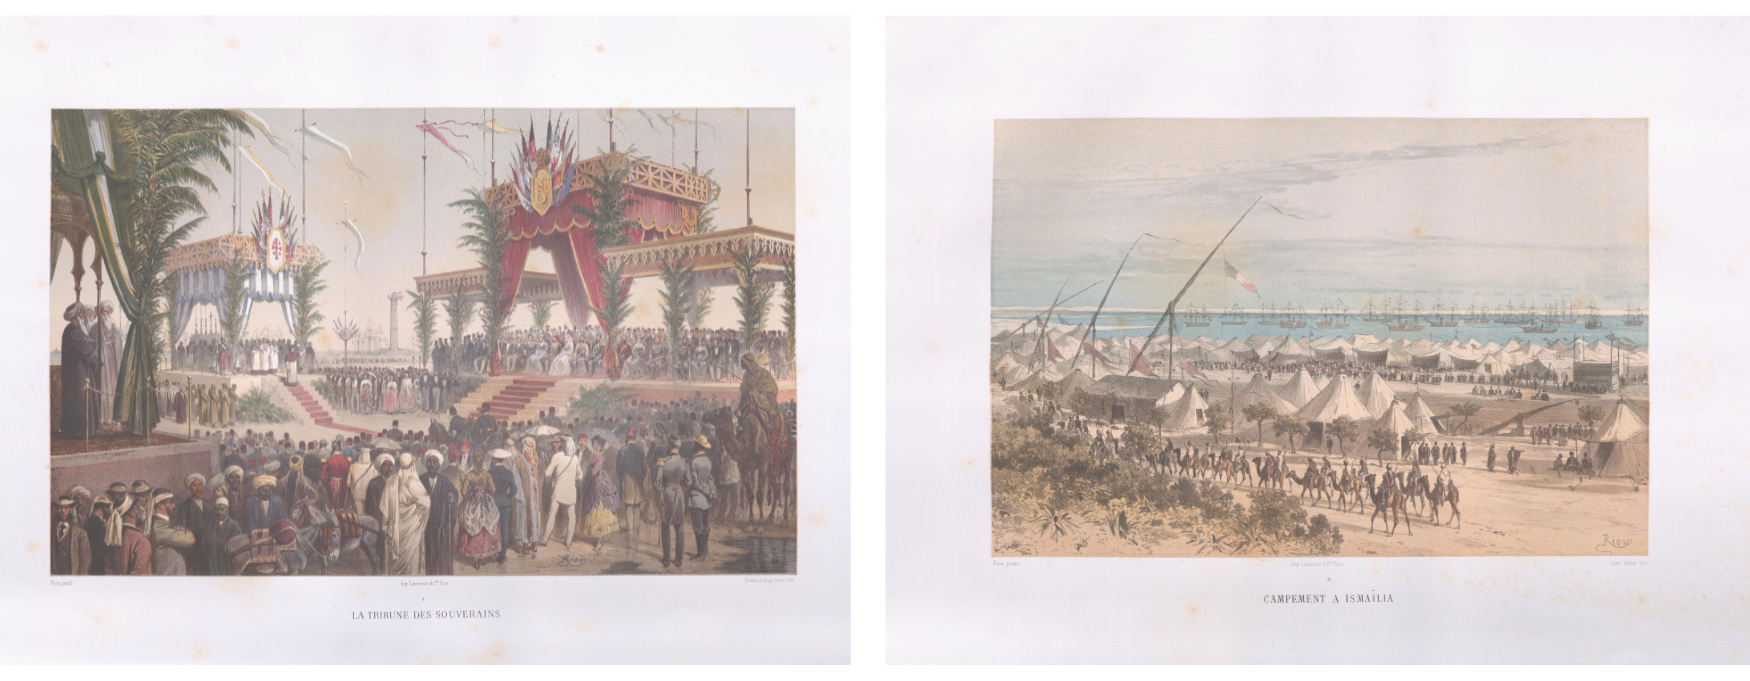 Two images from Baker Library's Special Collections depicting the Suez Canal